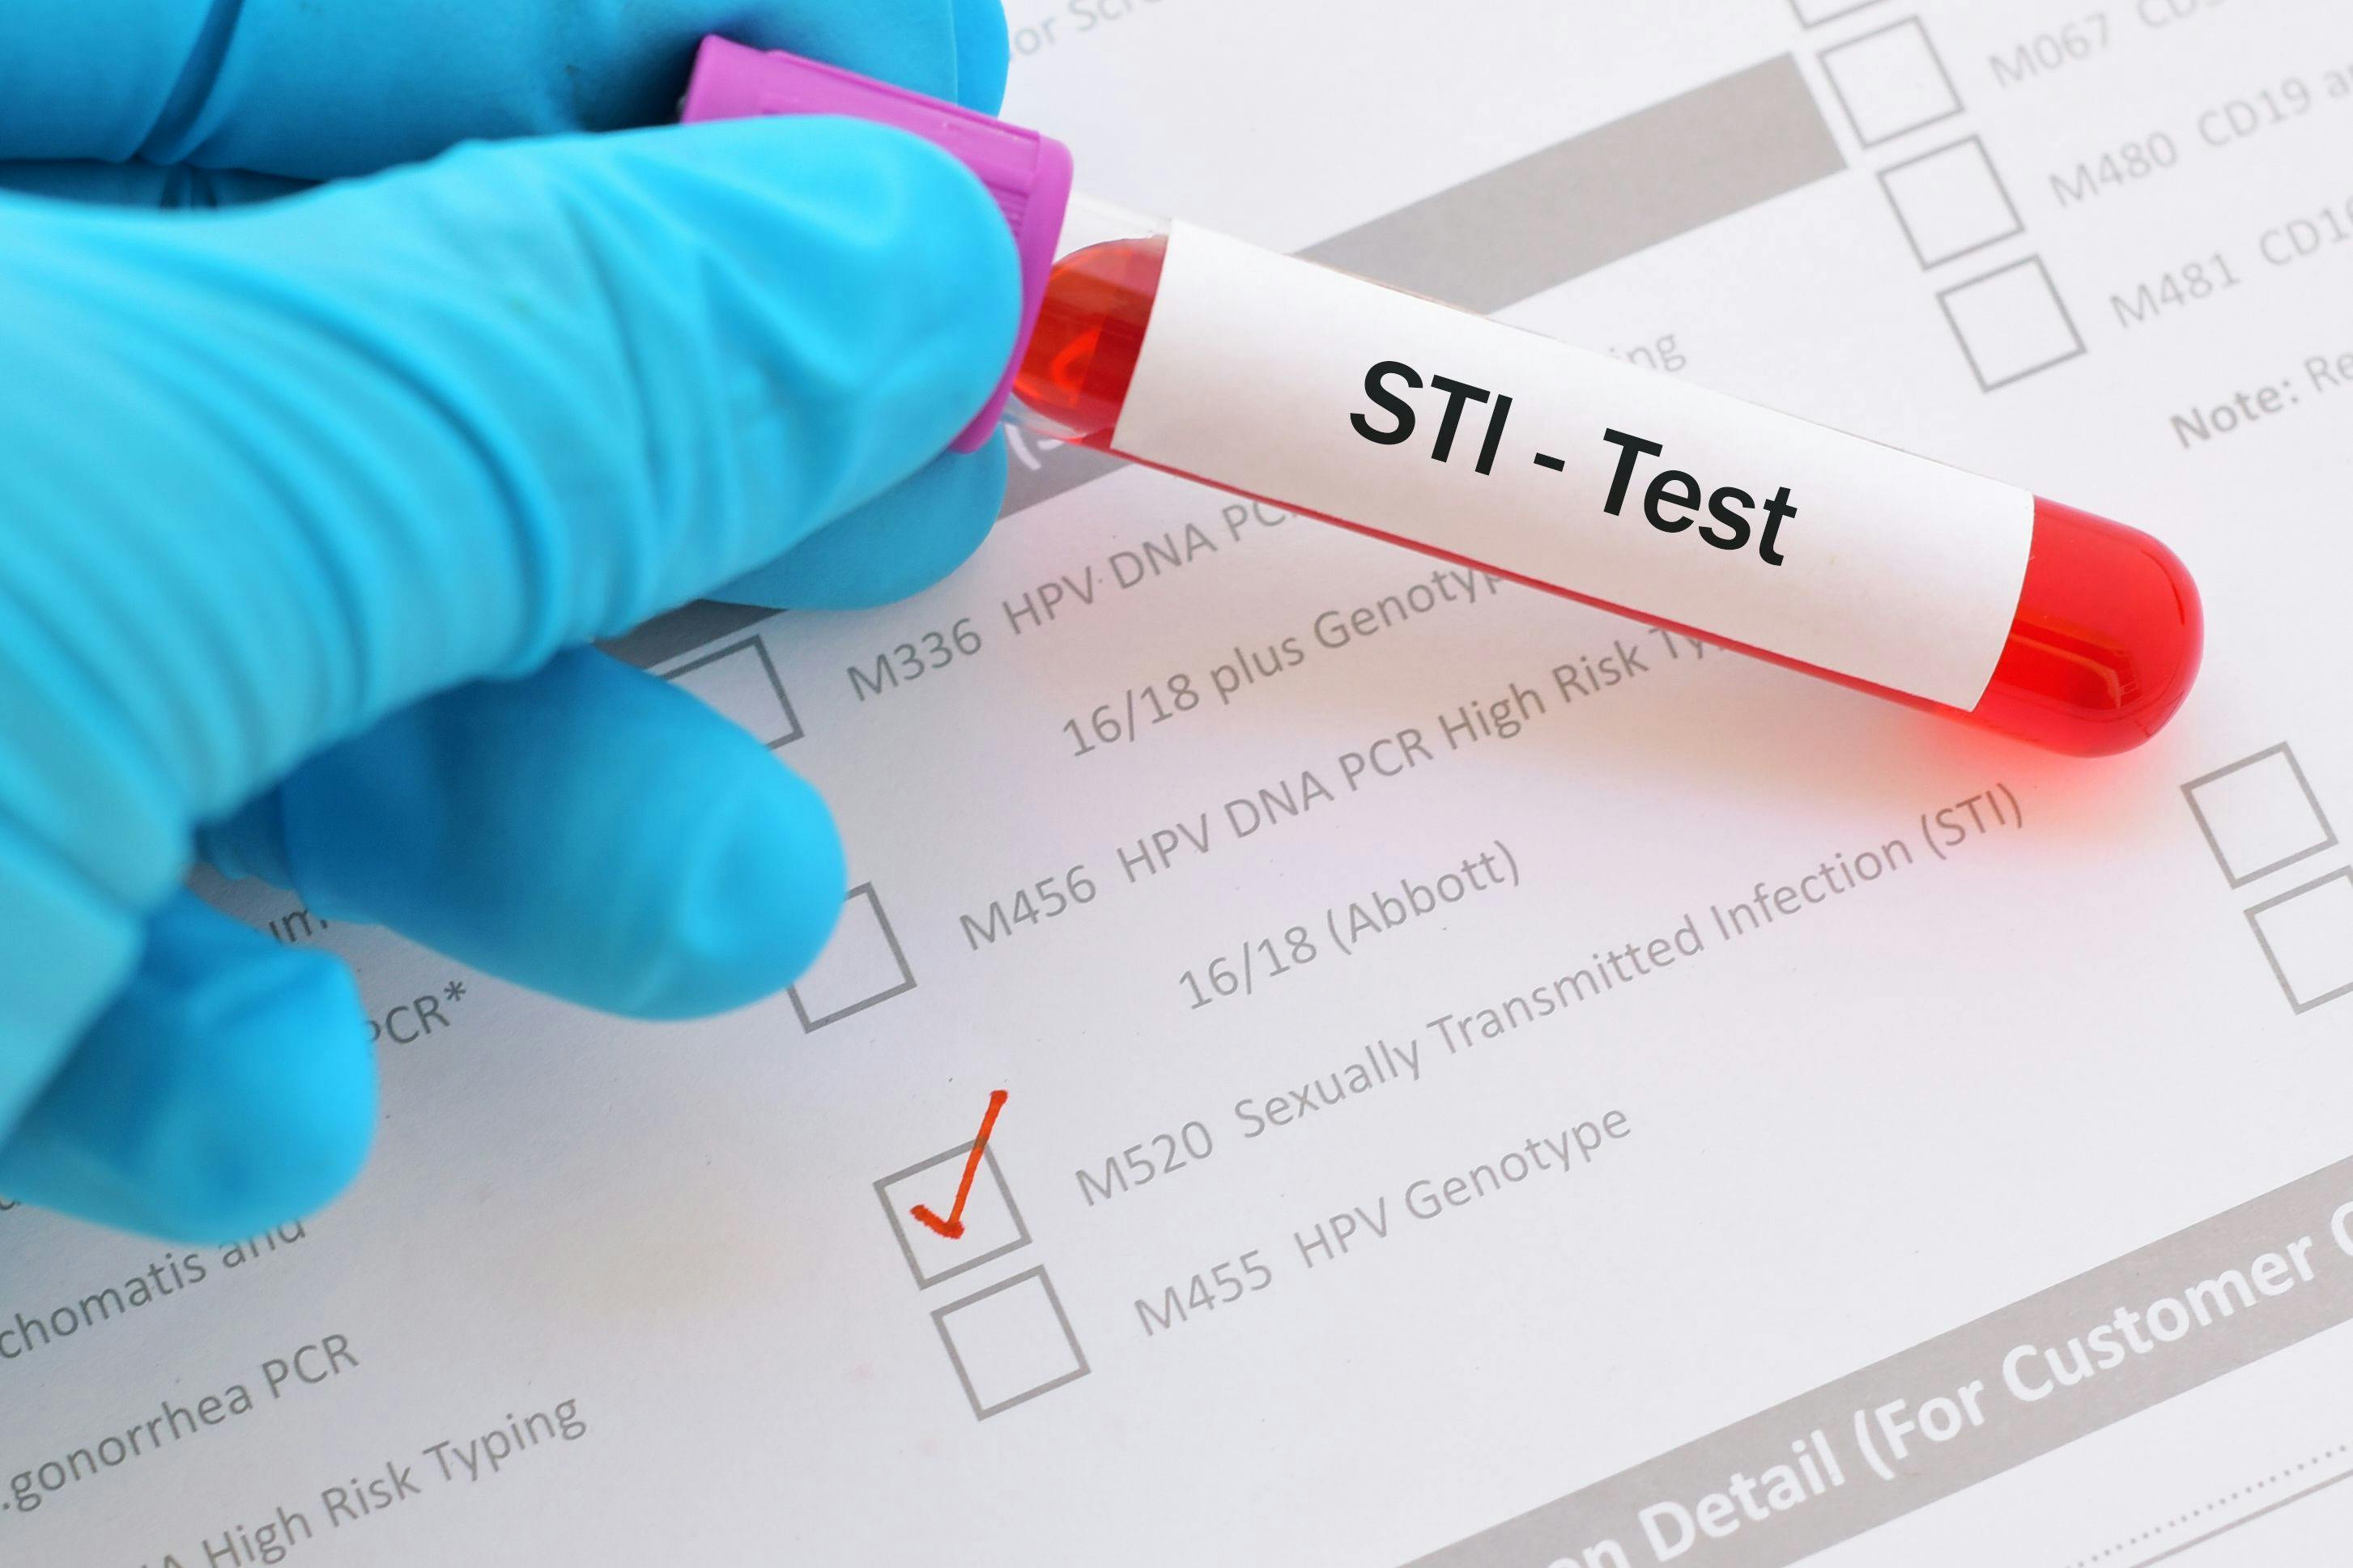 Blood sample with requisition form for sexually transmitted infection (STI) test - Image credit: Jarun011 | stock.adobe.com 